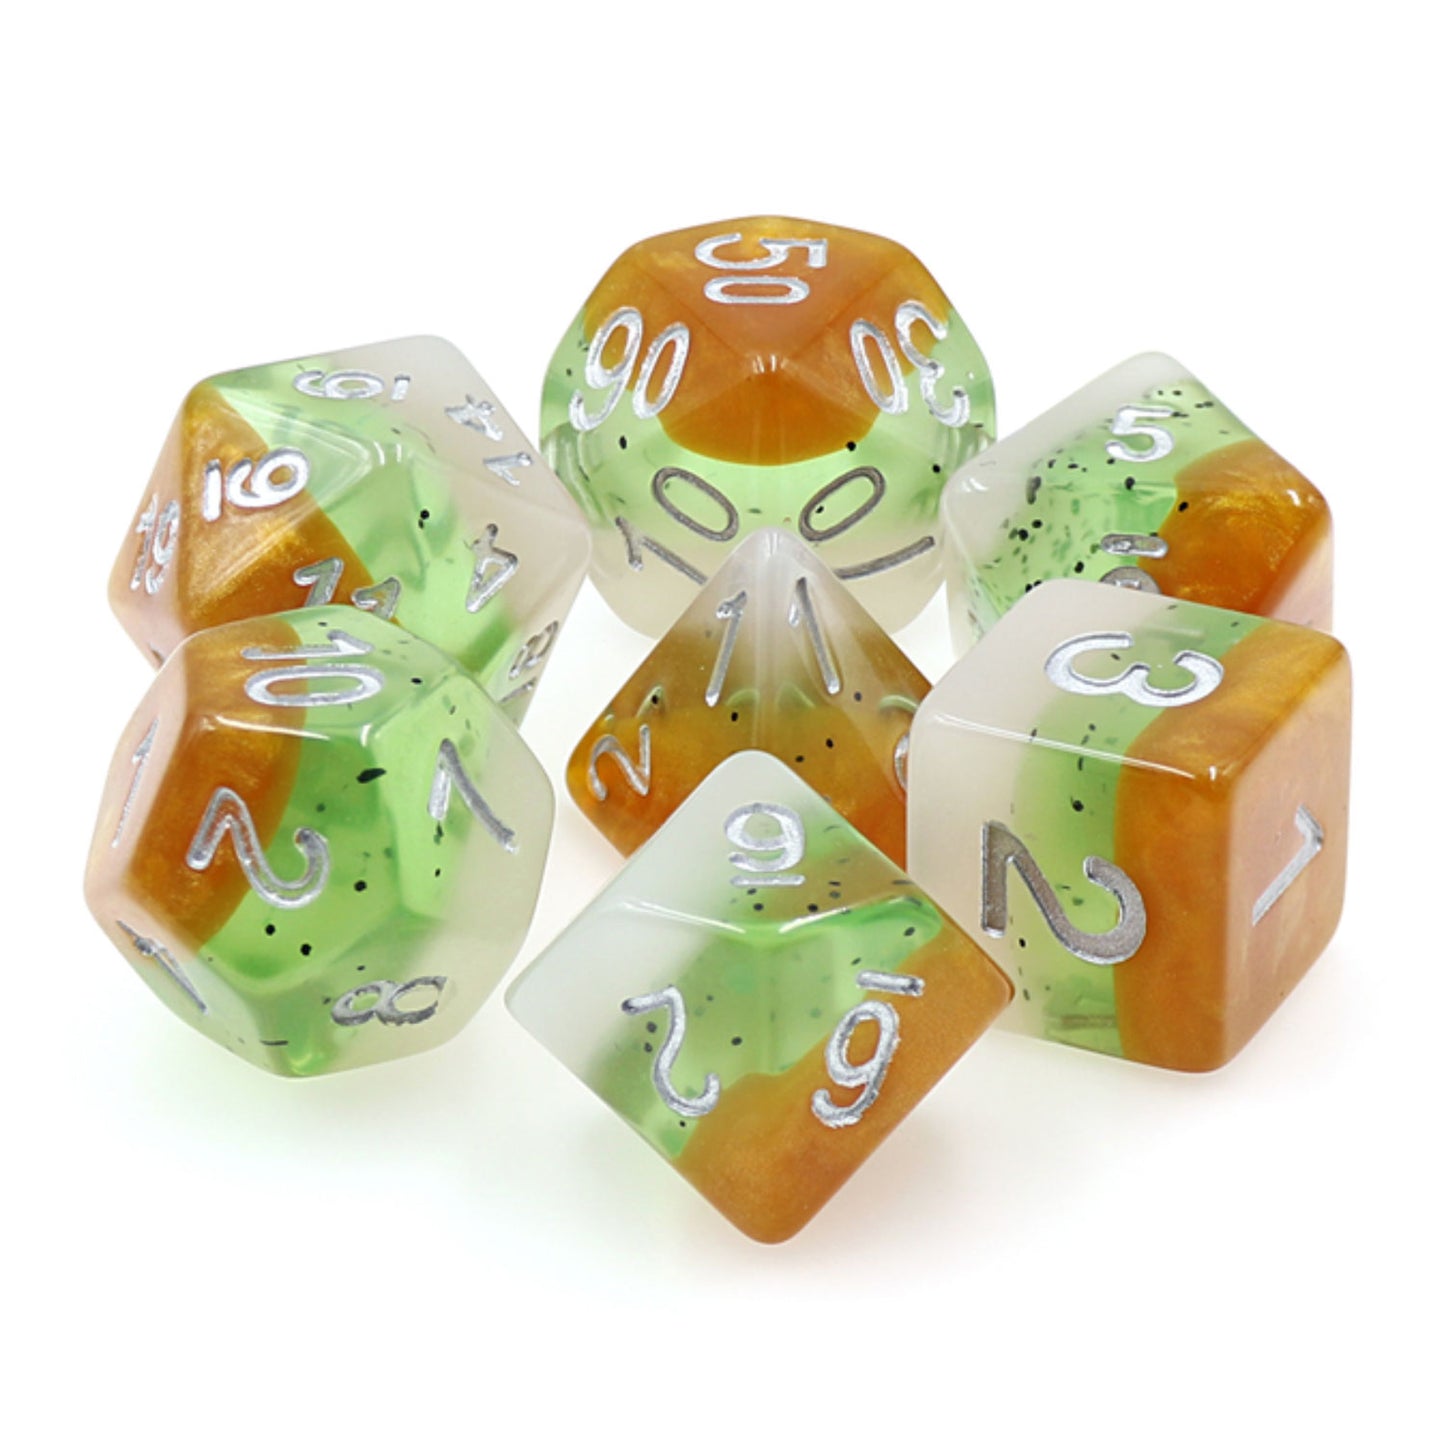 Kiwi Fruit RPG Polyhedral Dice Set for RPGS For DnD